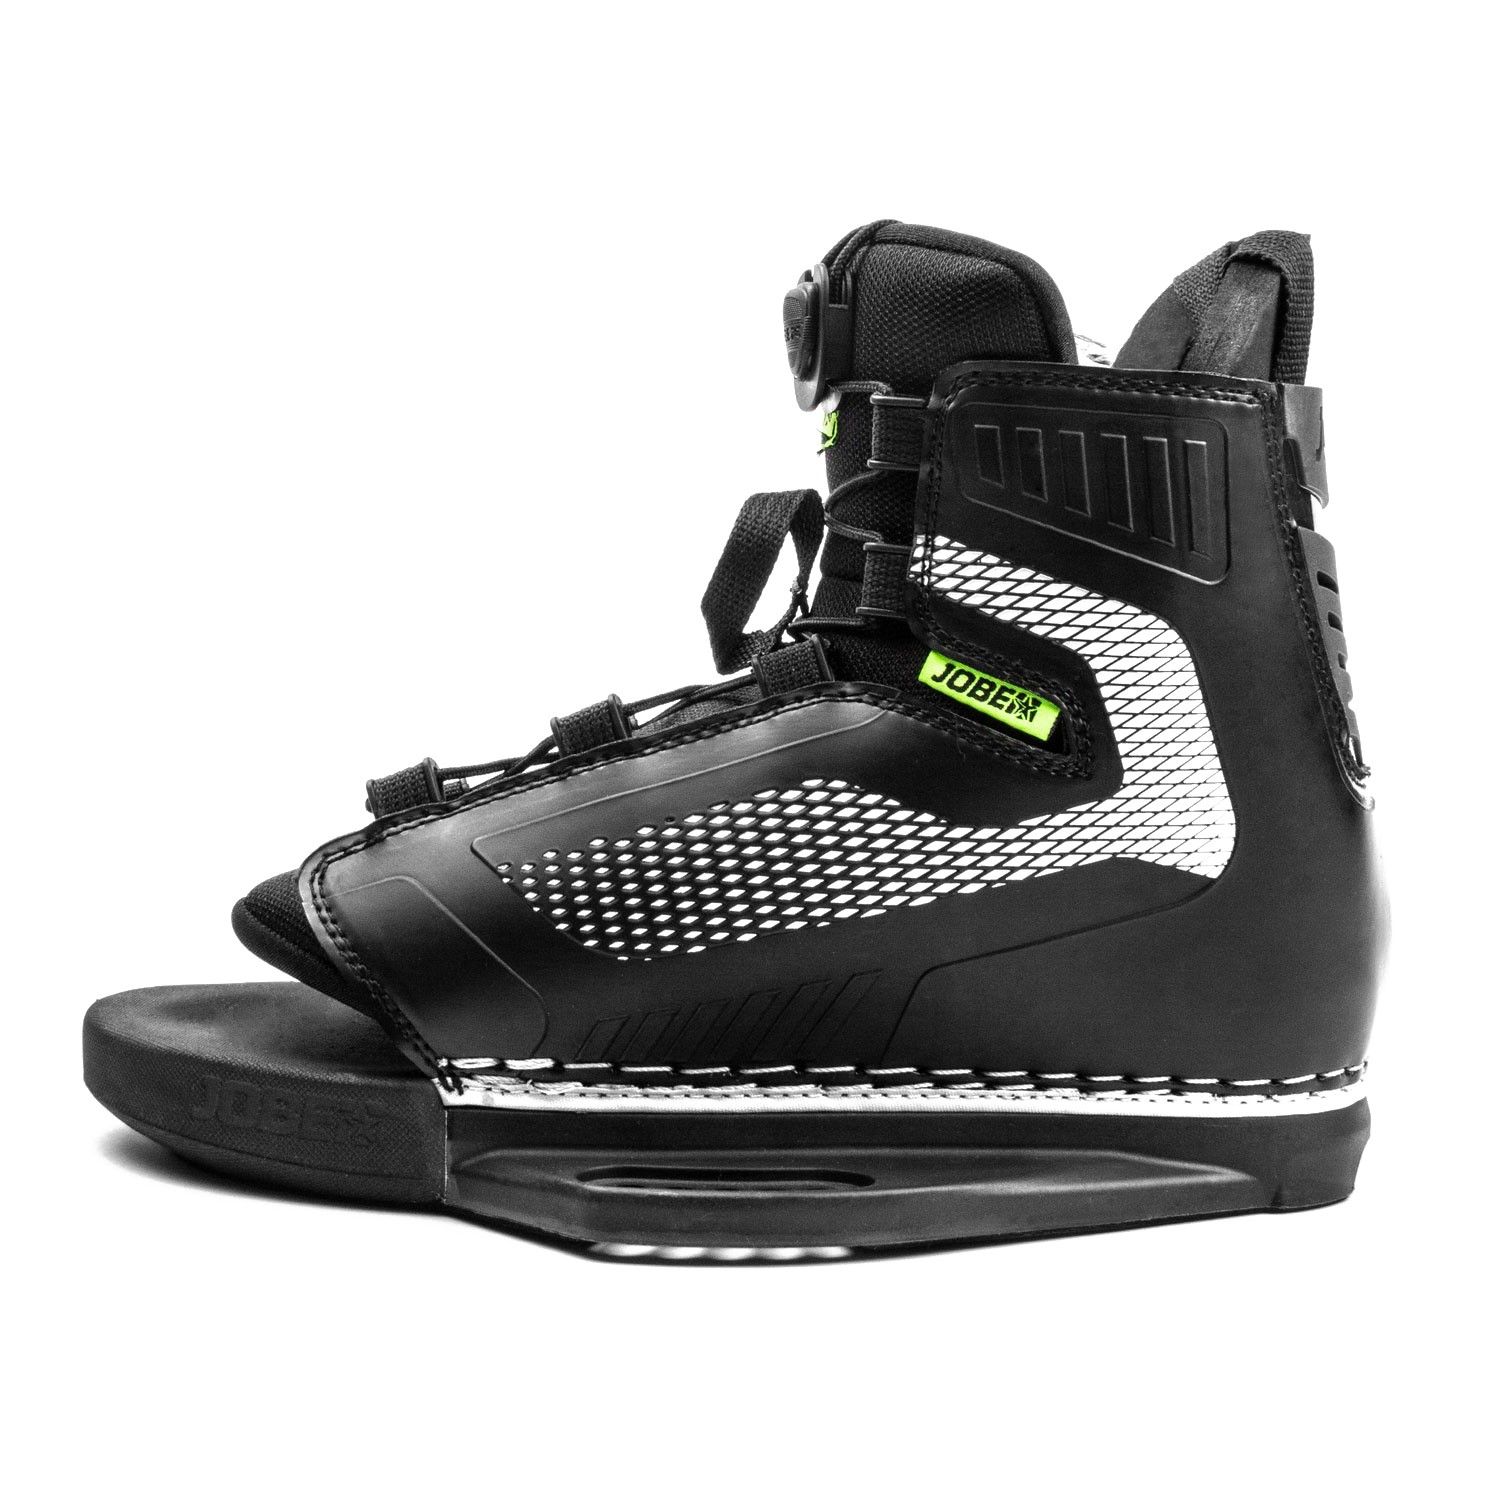 wakeboard outcast Bluewater  138 cm jobe maize bindings 